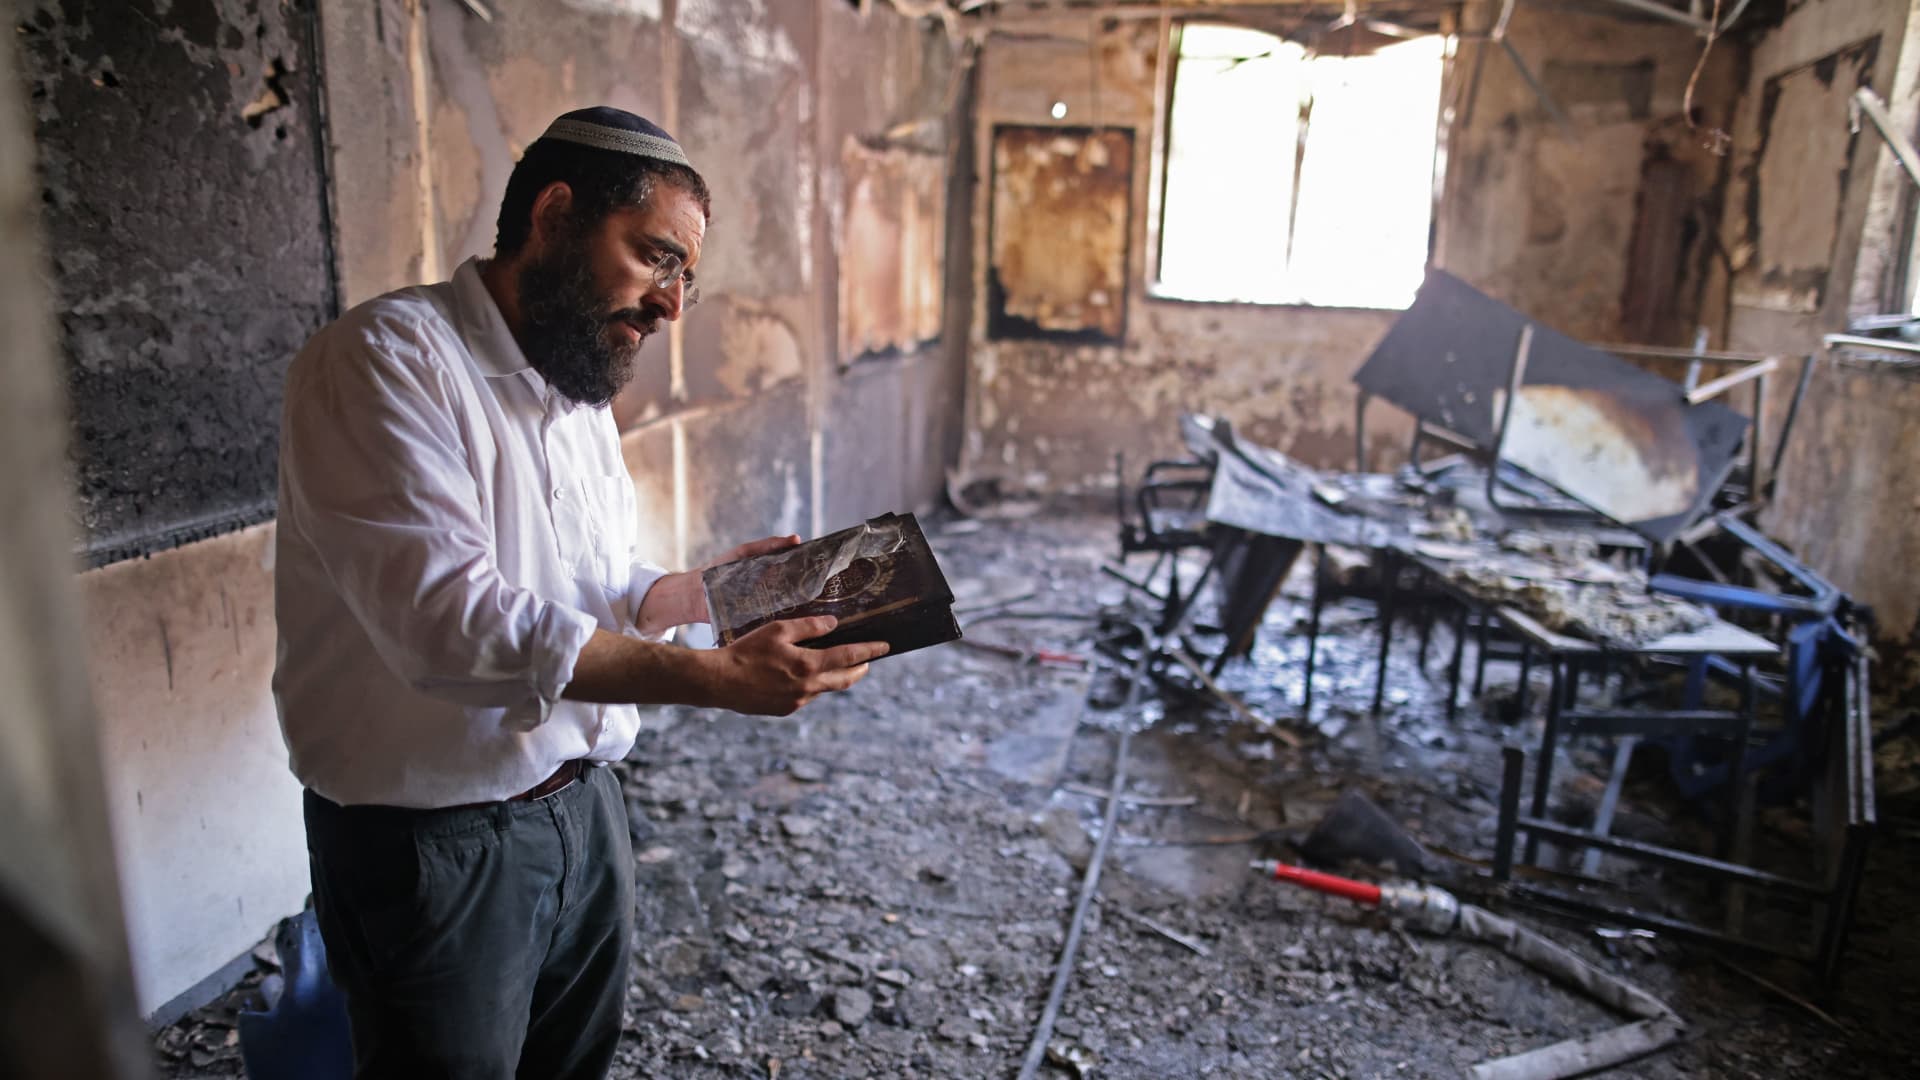 A rabbi inspects the damage inside a torched religious school in the central Israeli city of Lod, near Tel Aviv, on May 11, 2021, following night clashes between Arab Israelis and Israeli Jews.